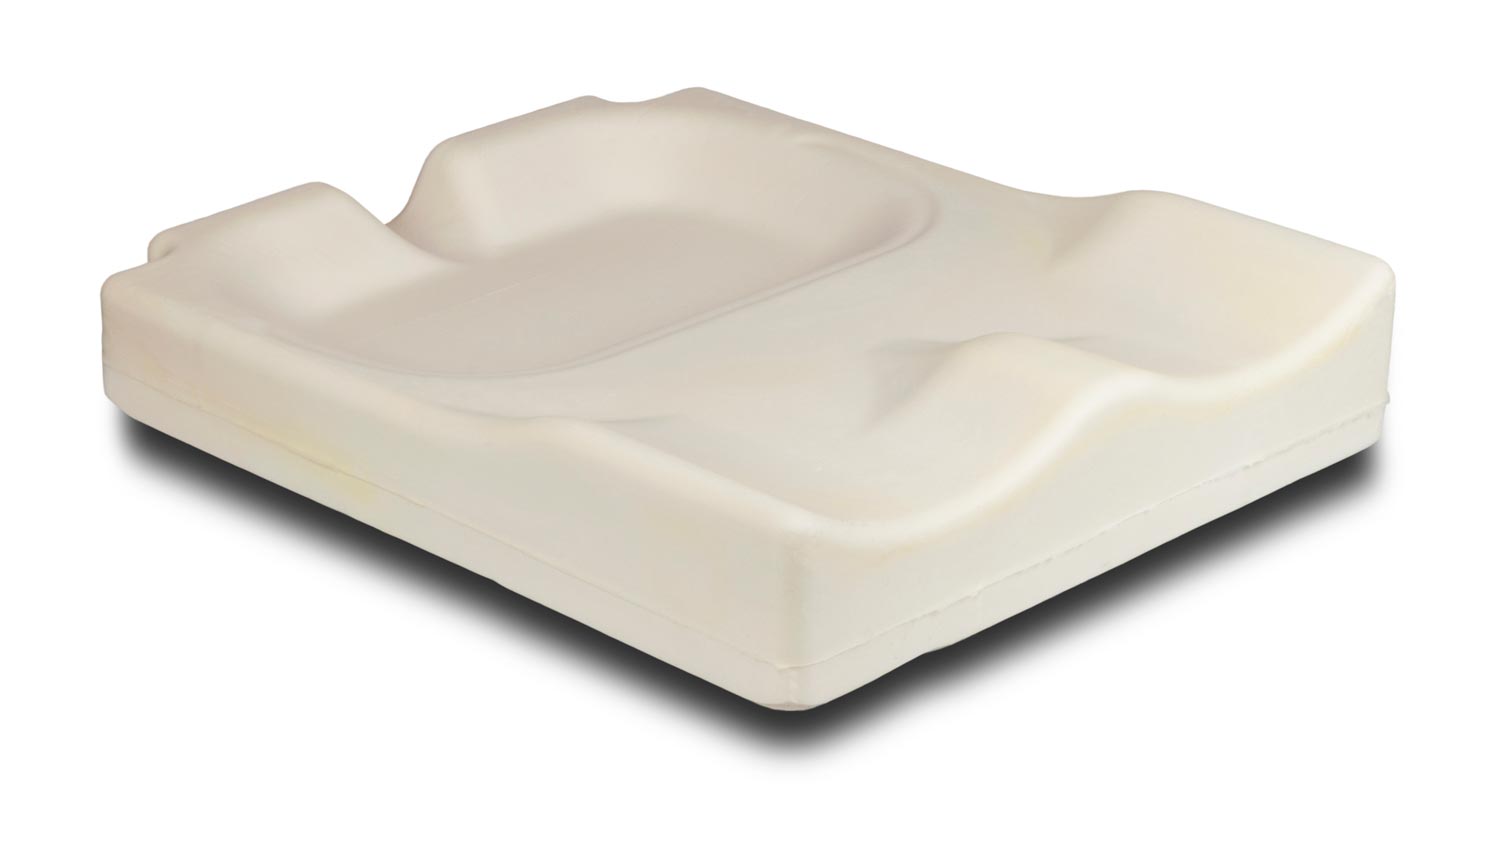 Contoured Foam Base with Optional Curved Bottom